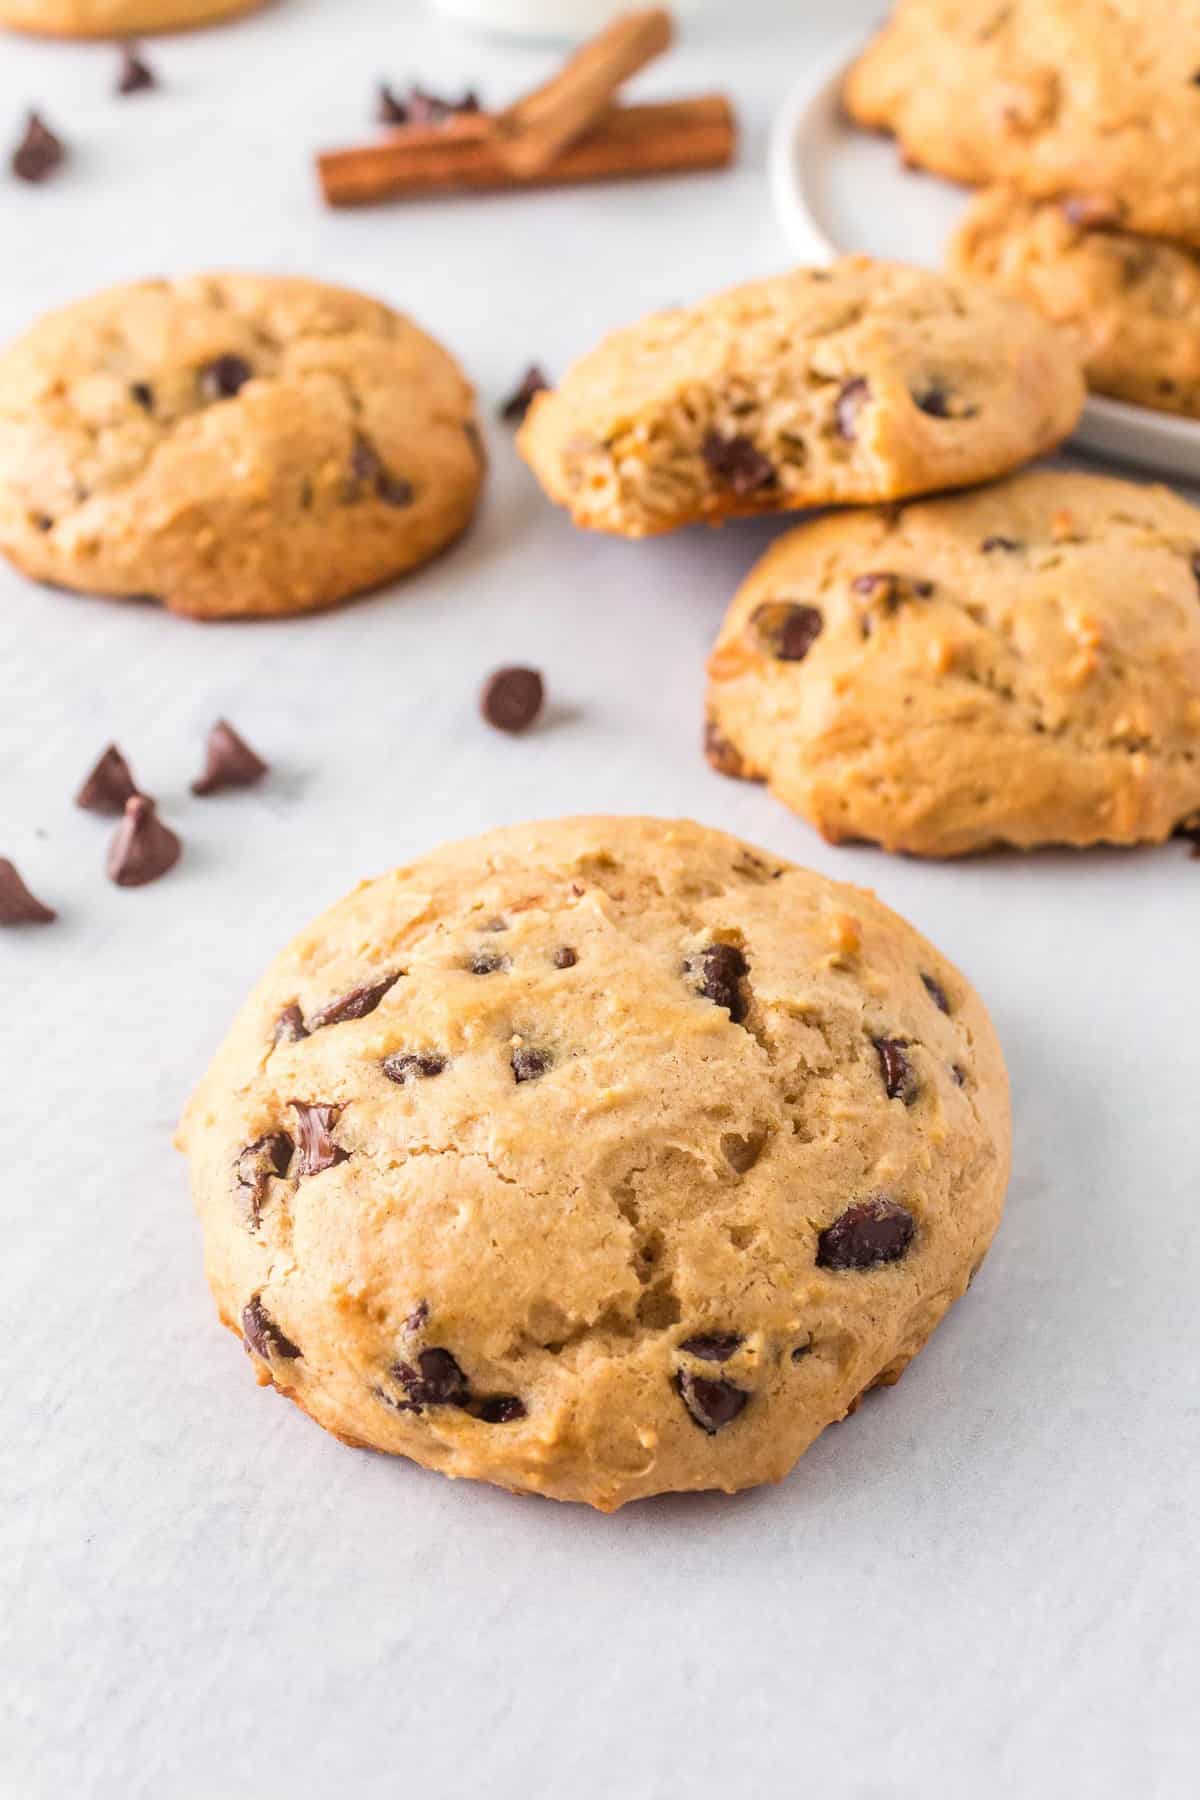 Fluffy thick chocolate chip cookie.